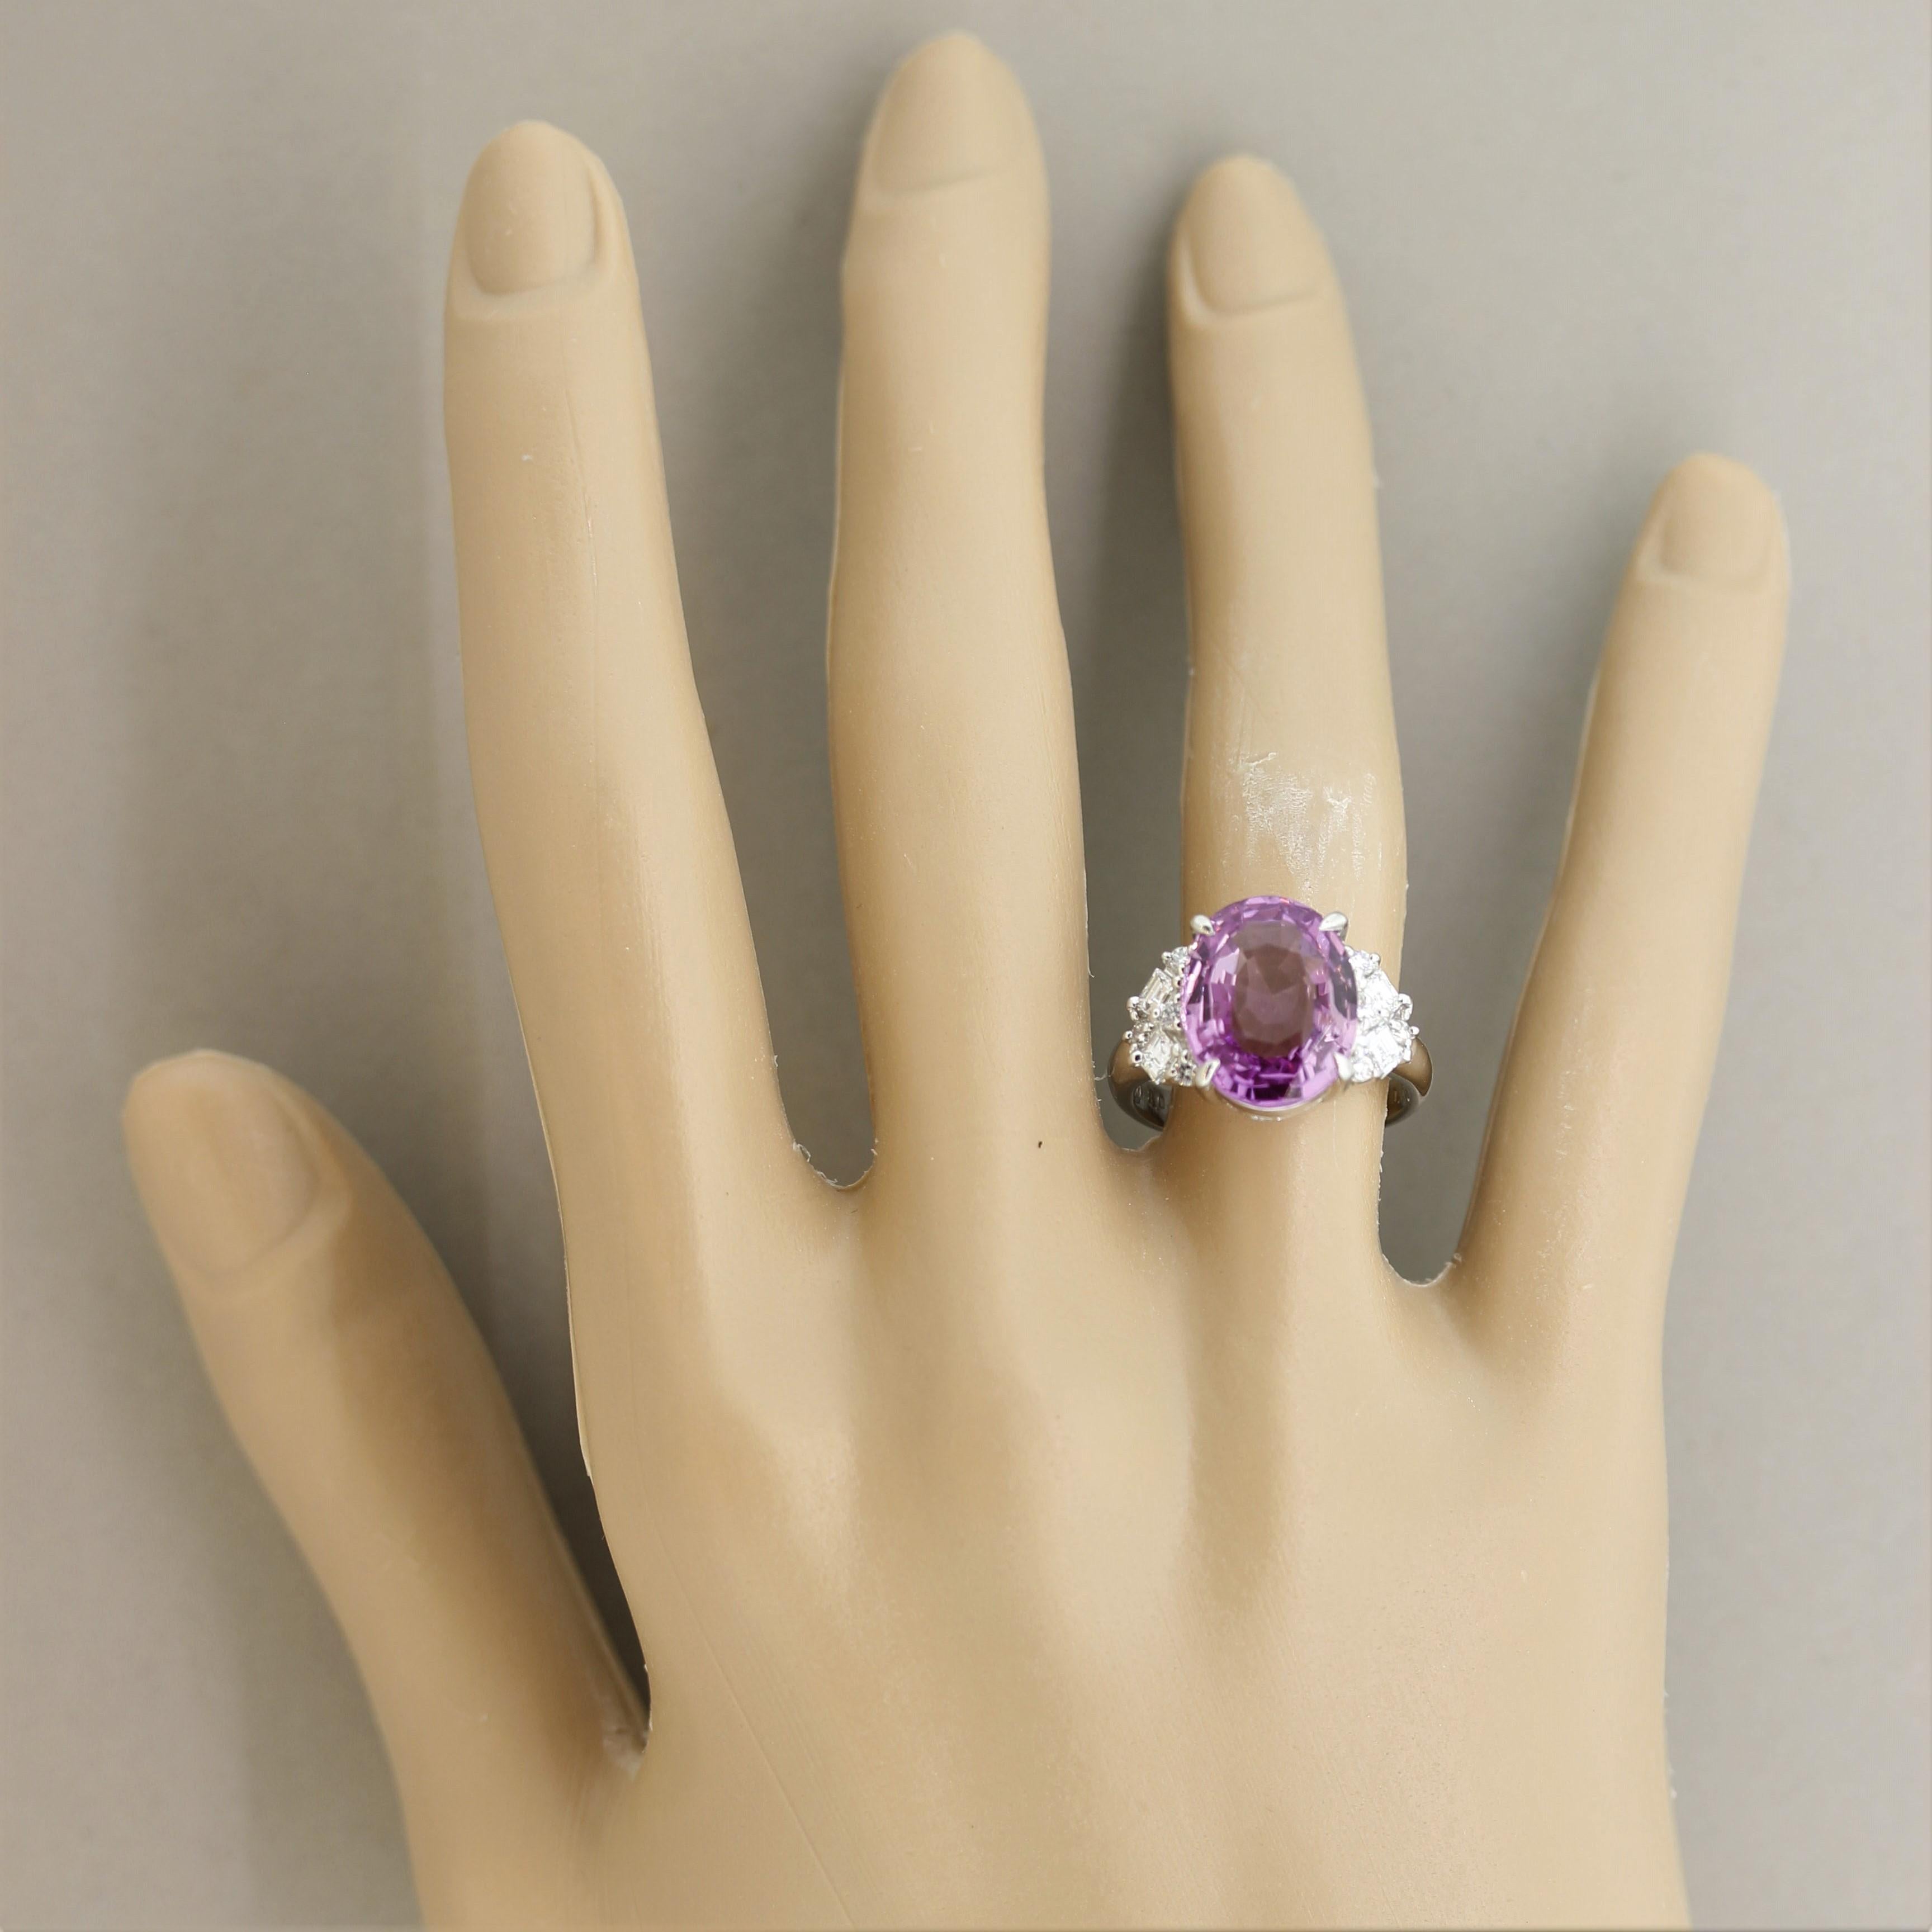 8.04 Carat Pink Sapphire Diamond Platinum Ring, GIA Certified For Sale 1